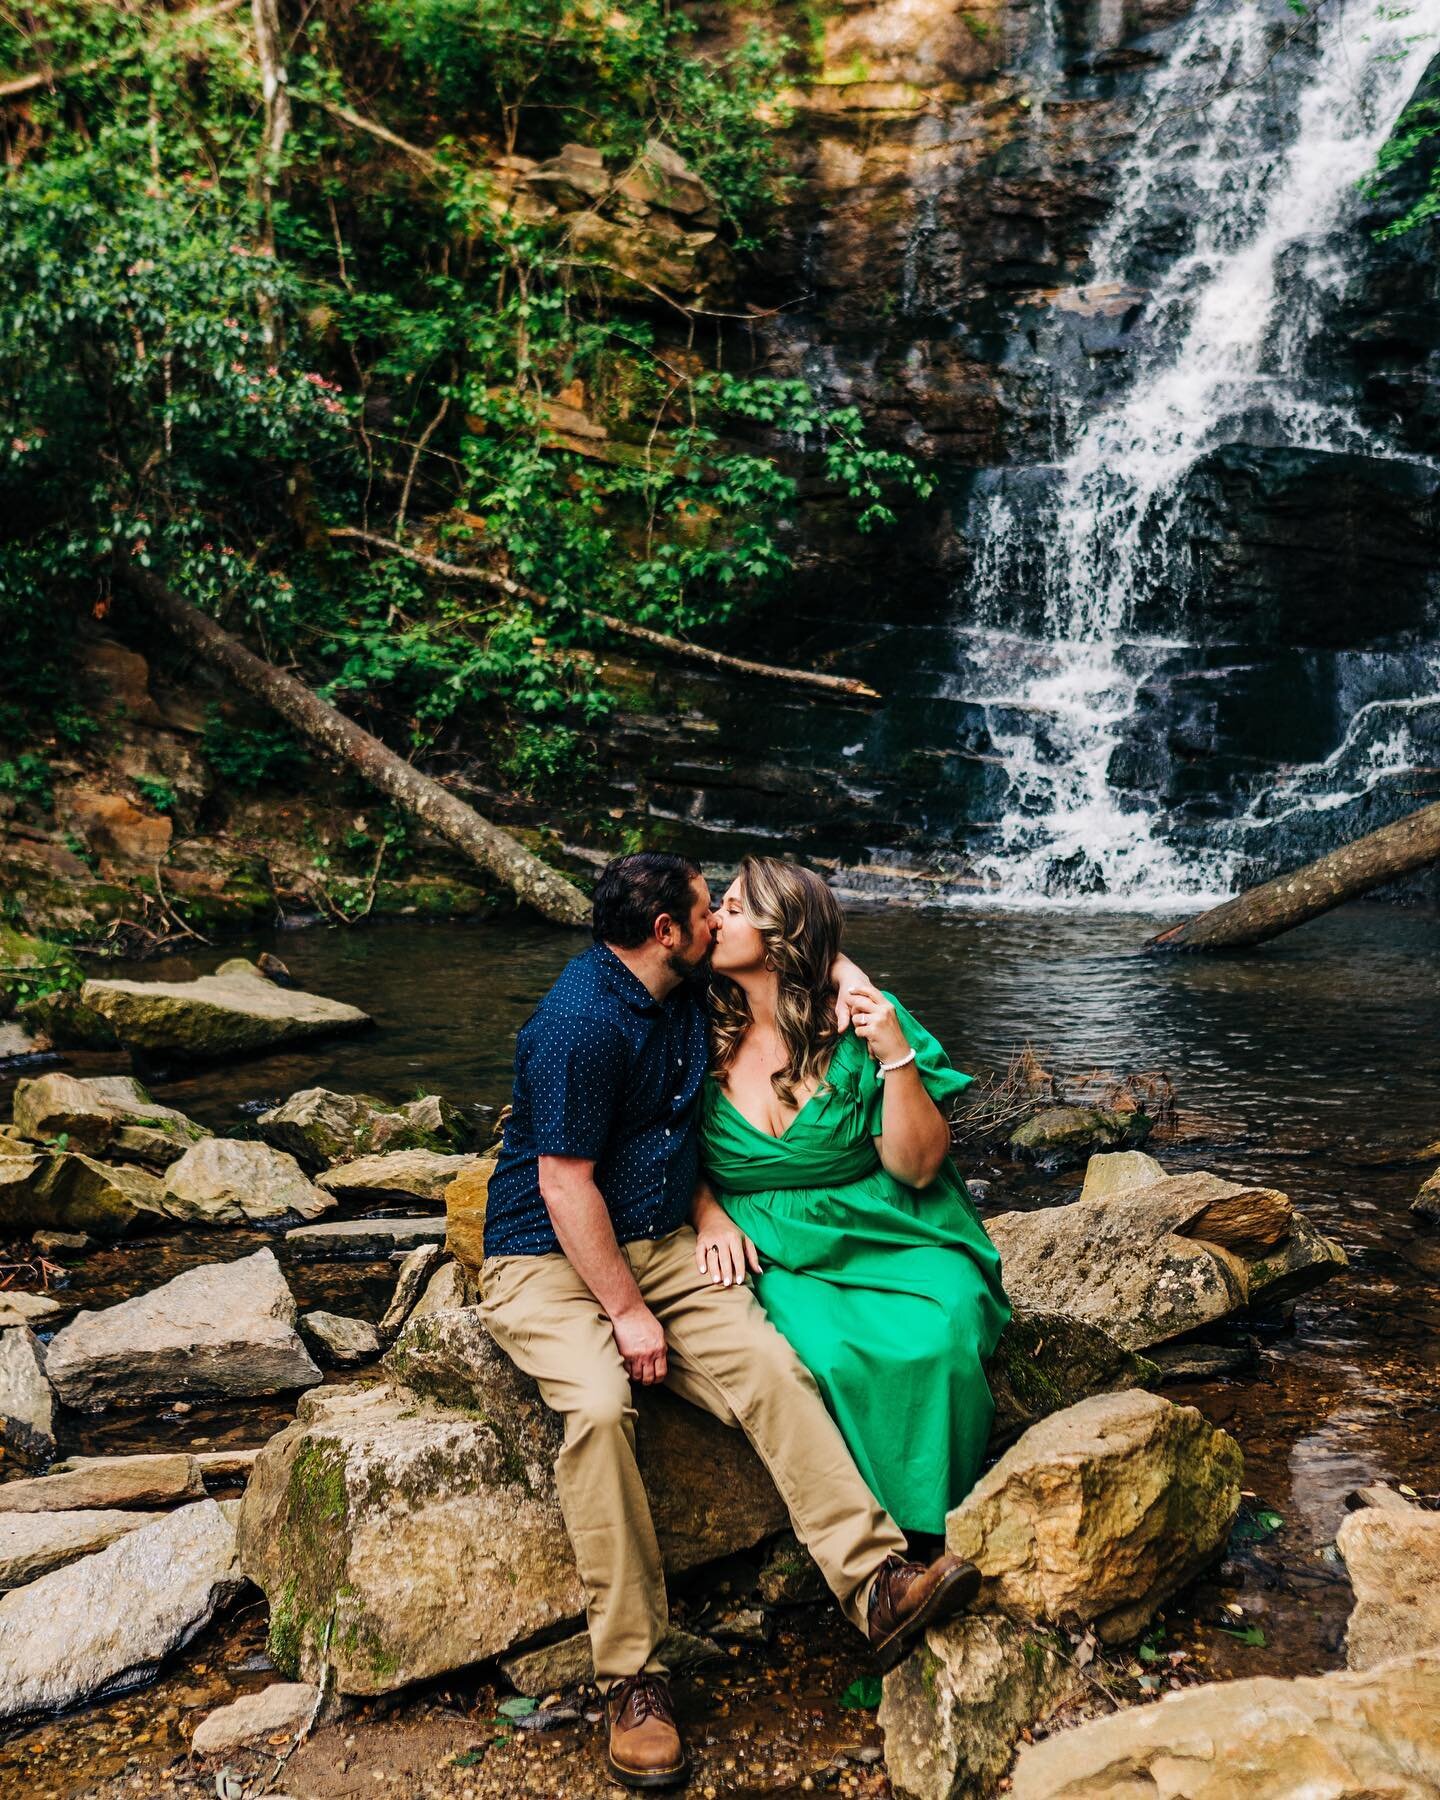 Feeling all the summer vibes from this river session last week. Such a fun + sweet couple!